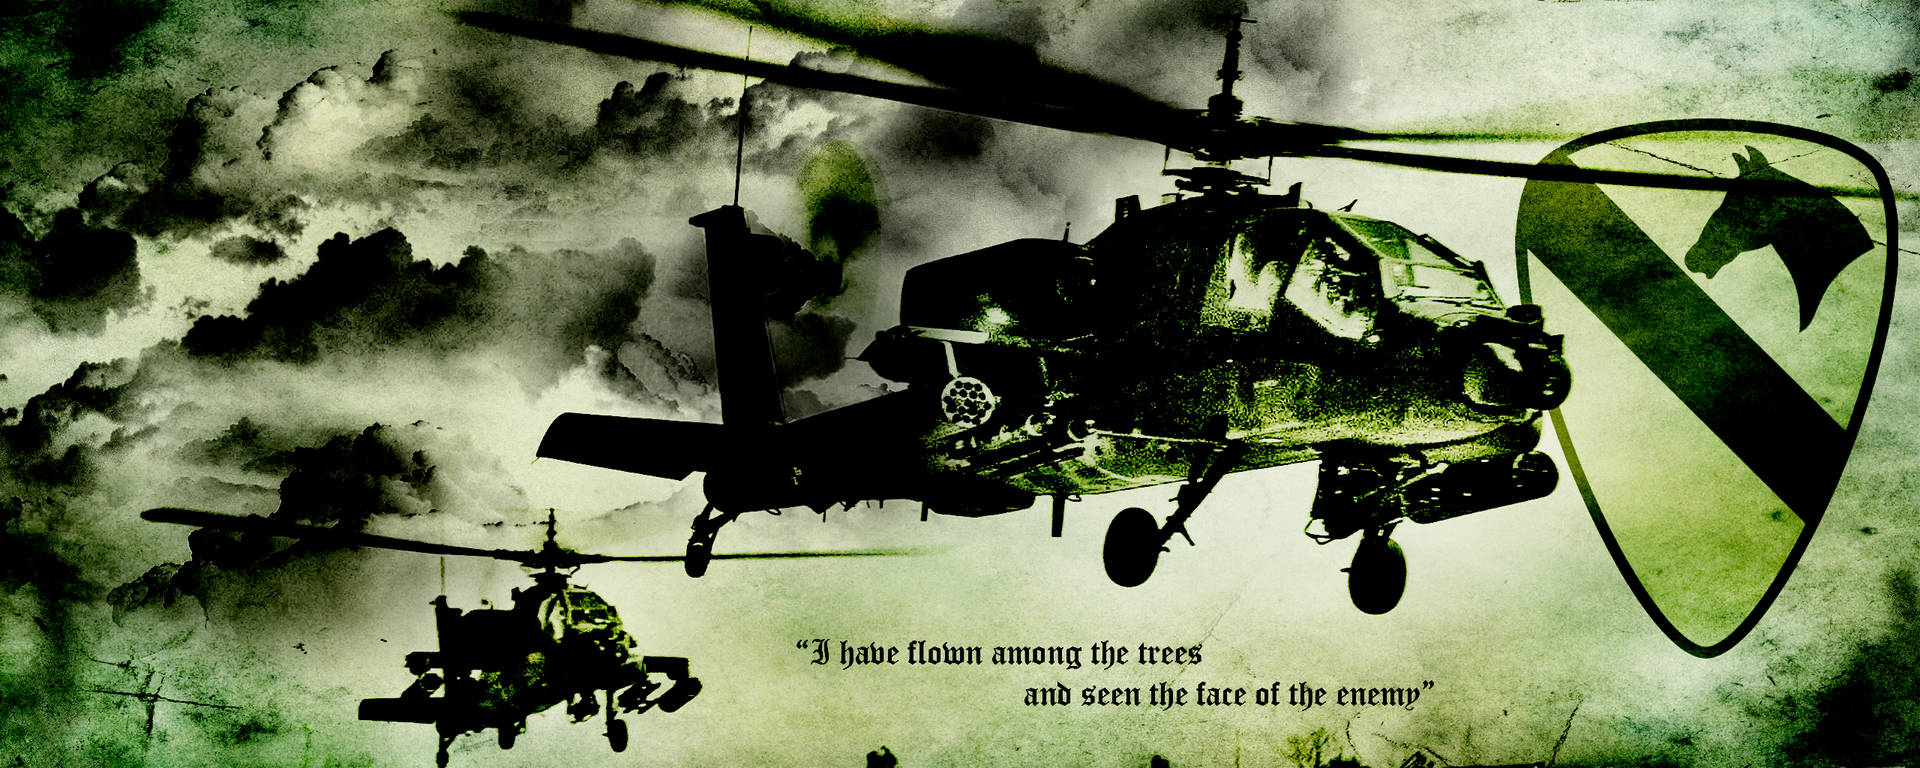 Quote About Attack Helicopter 4k Background